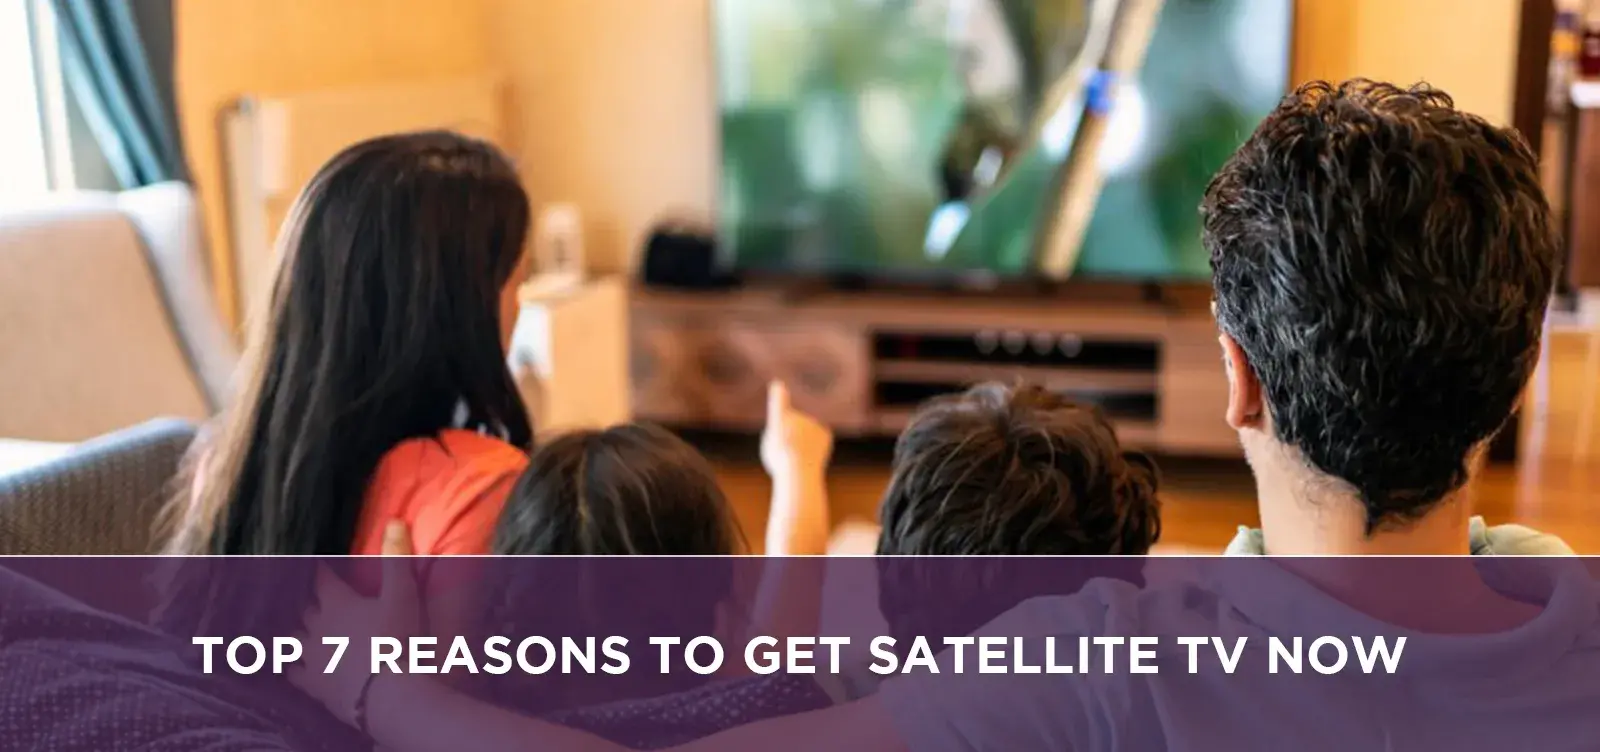 Top 7 Reasons to Get Satellite TV Now